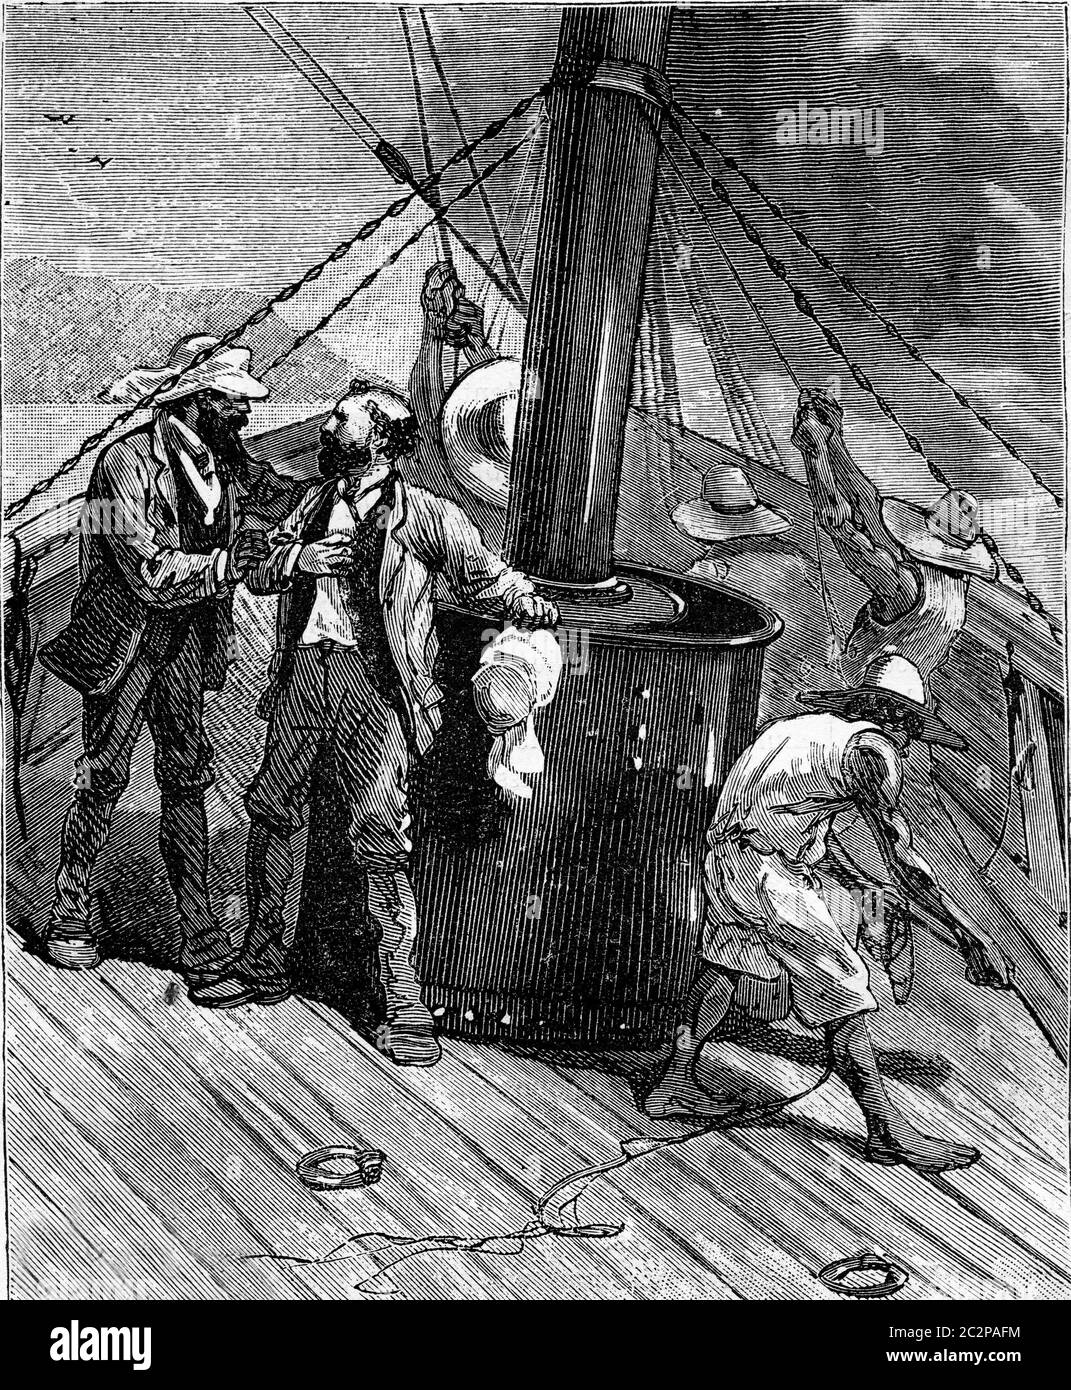 Six thousand miles through South America. Men aboard the Scotia. From Travel Diaries, vintage engraving, 1884-85. Stock Photo